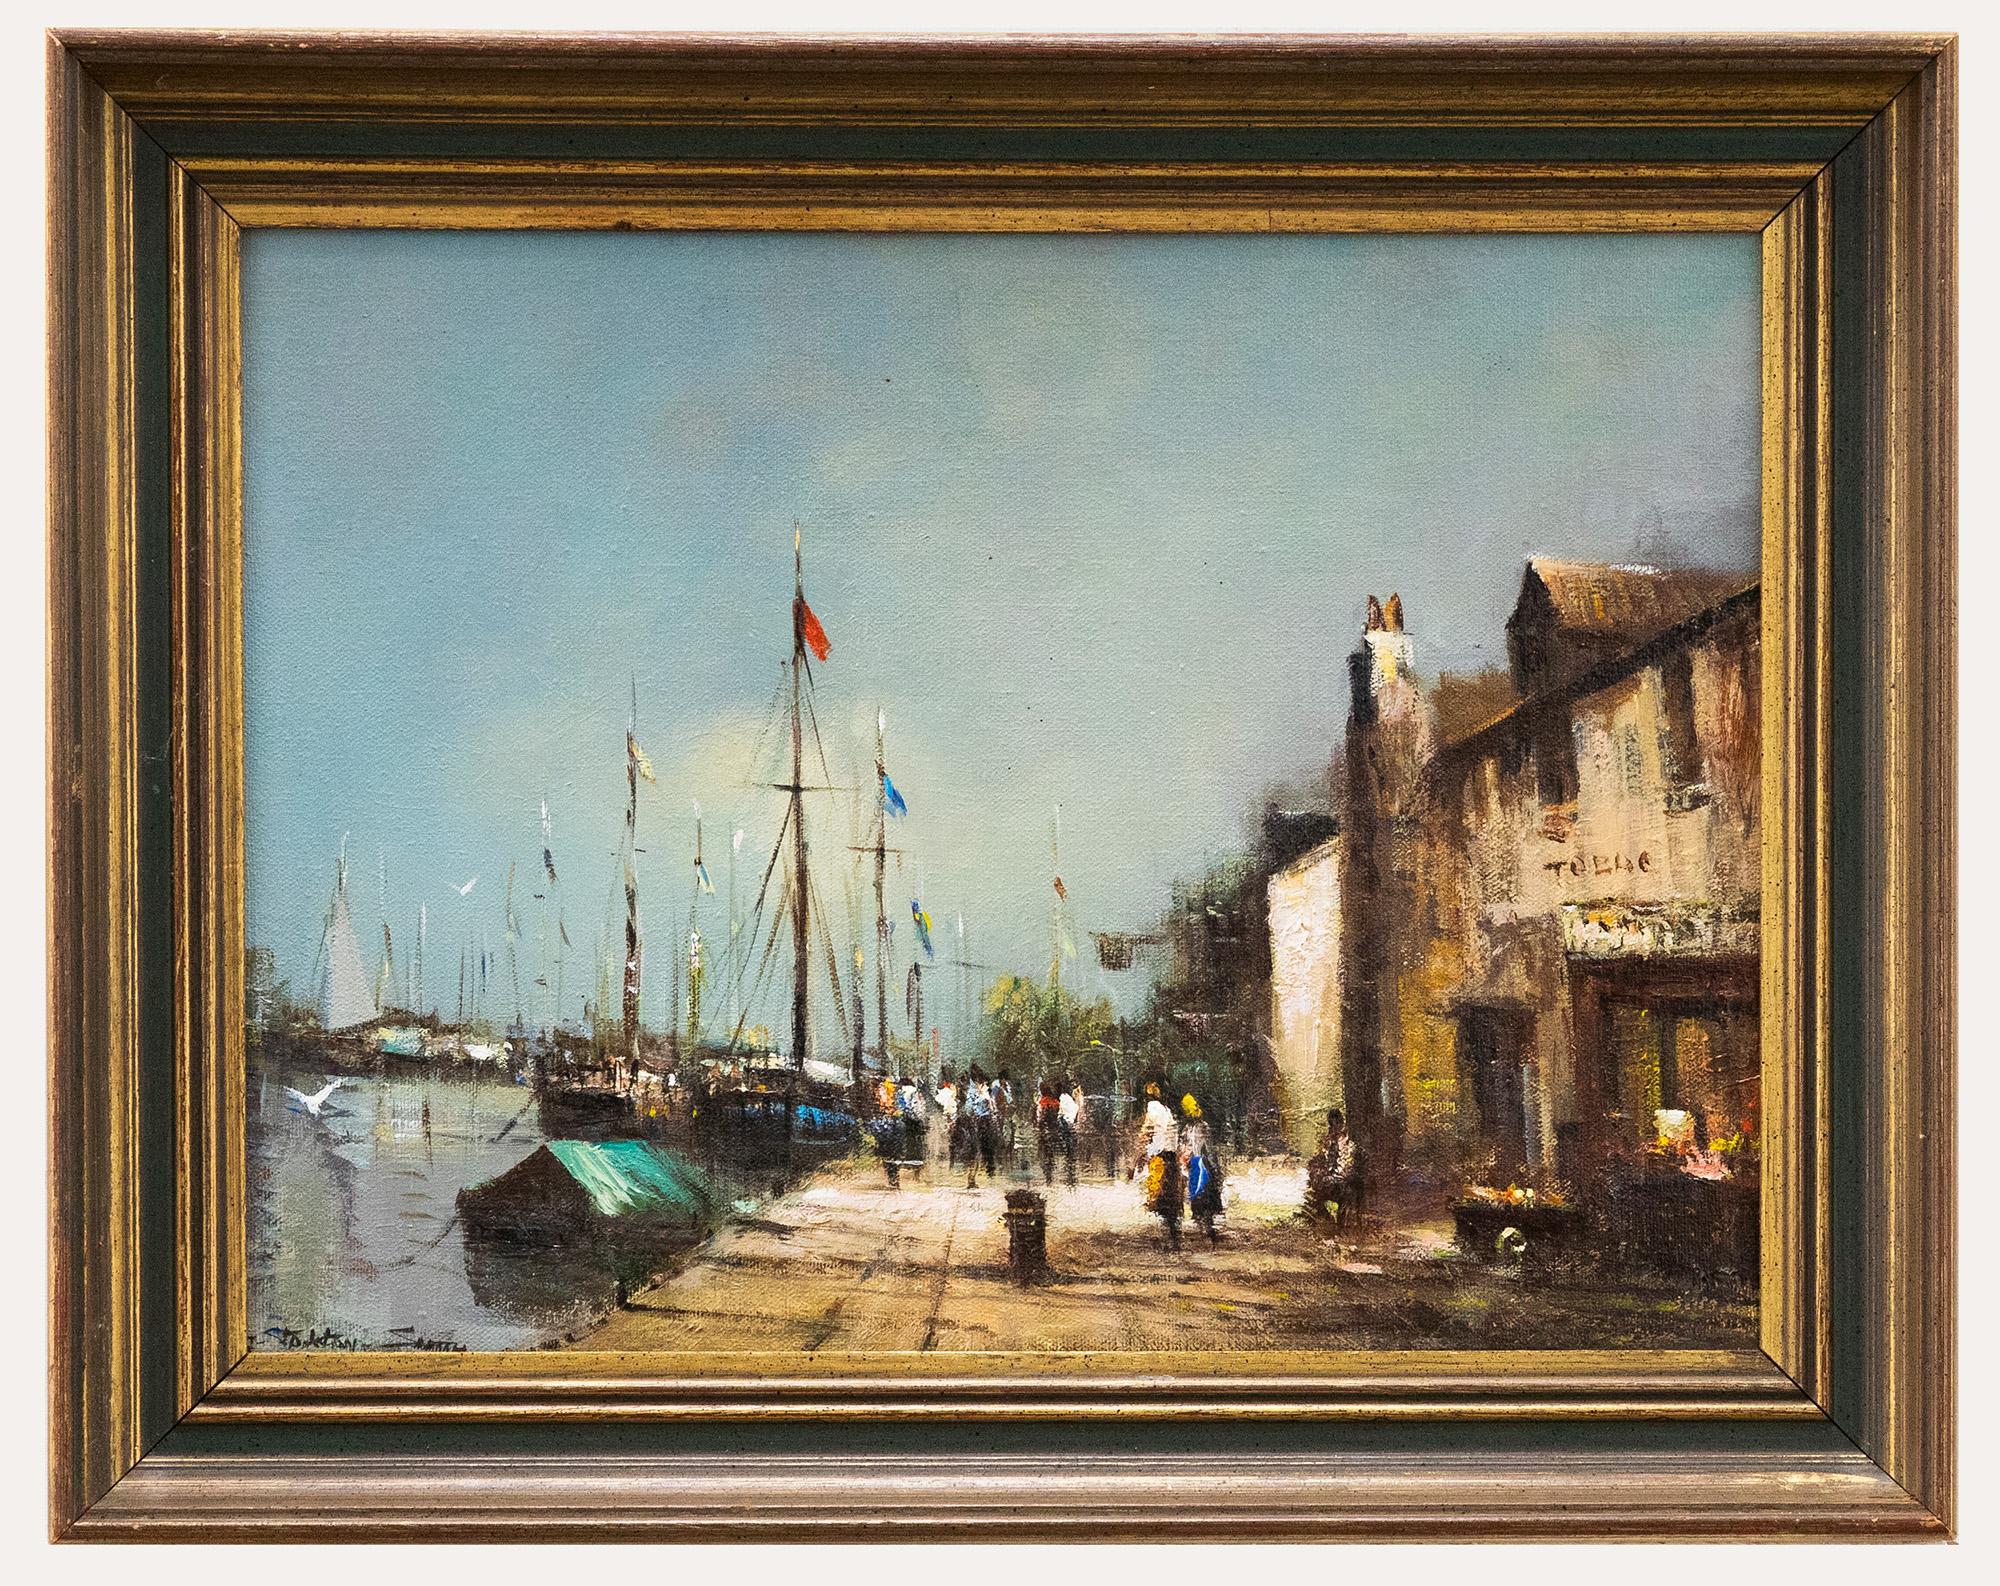 Unknown Figurative Painting - Donald Stockton-Smith - Framed Contemporary Oil, Honfleur